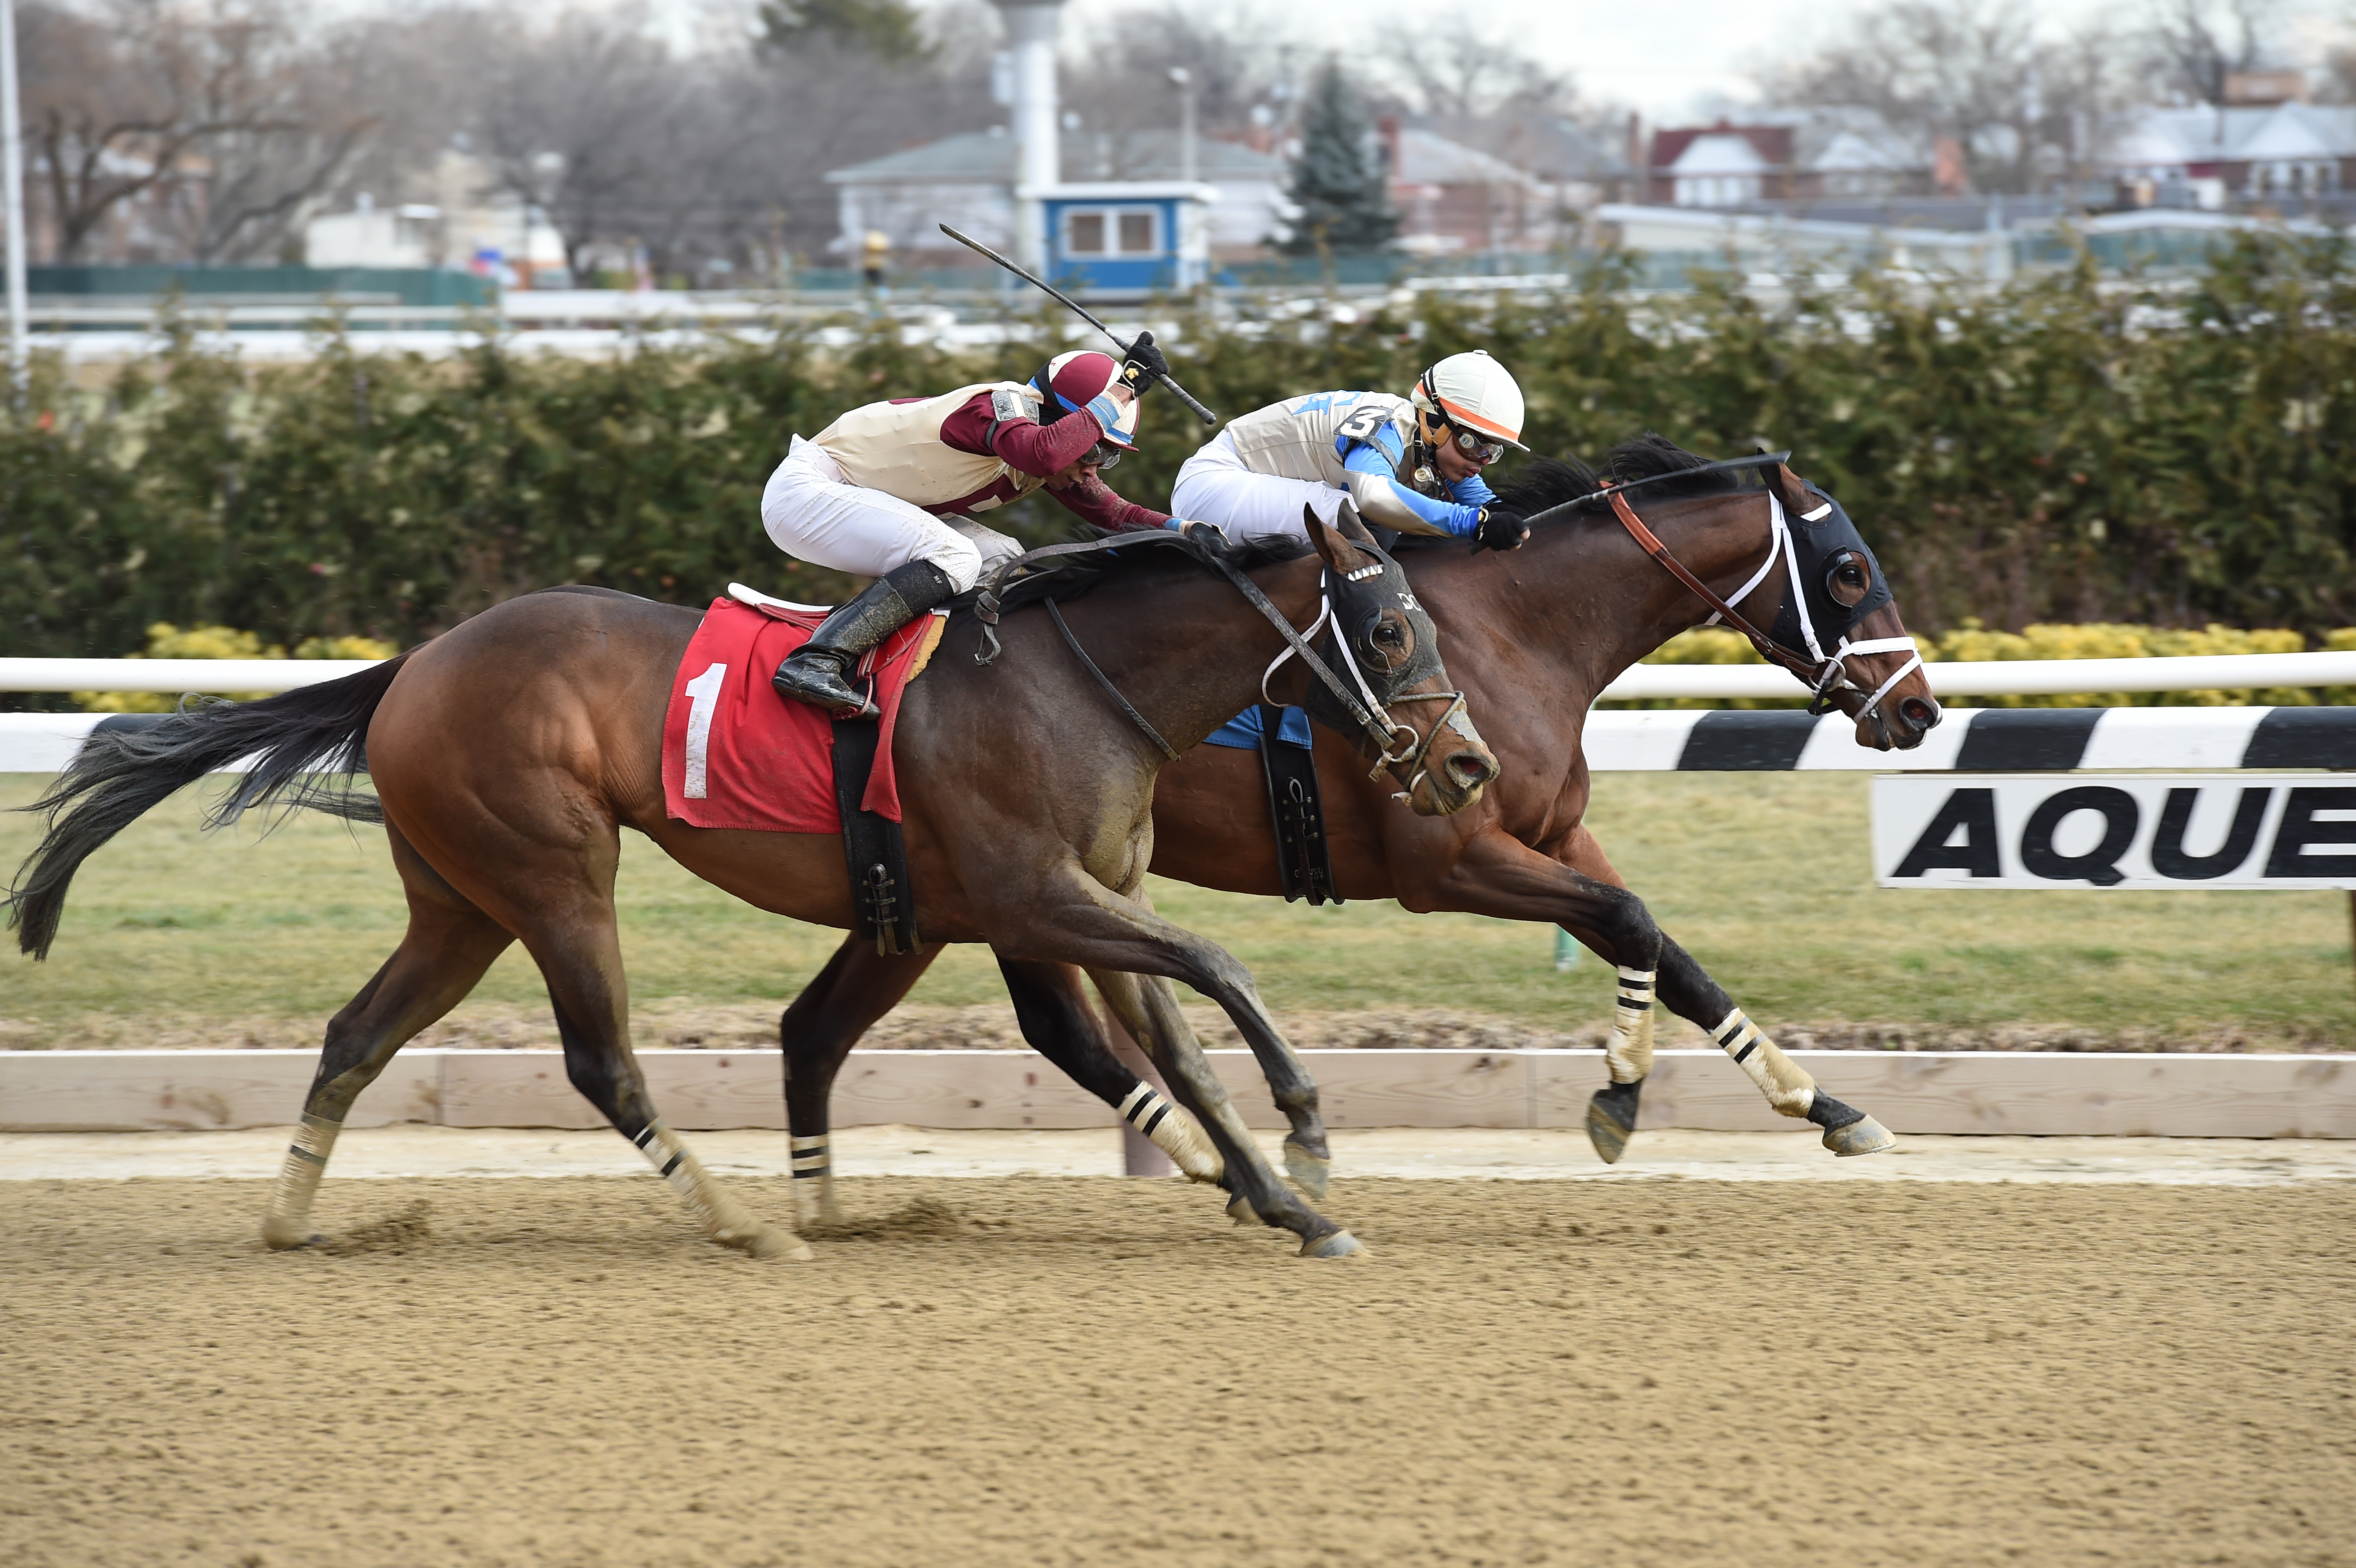 River Date went gate to wire December 30th at Aqueduct. Photo by Adam Coglianese.